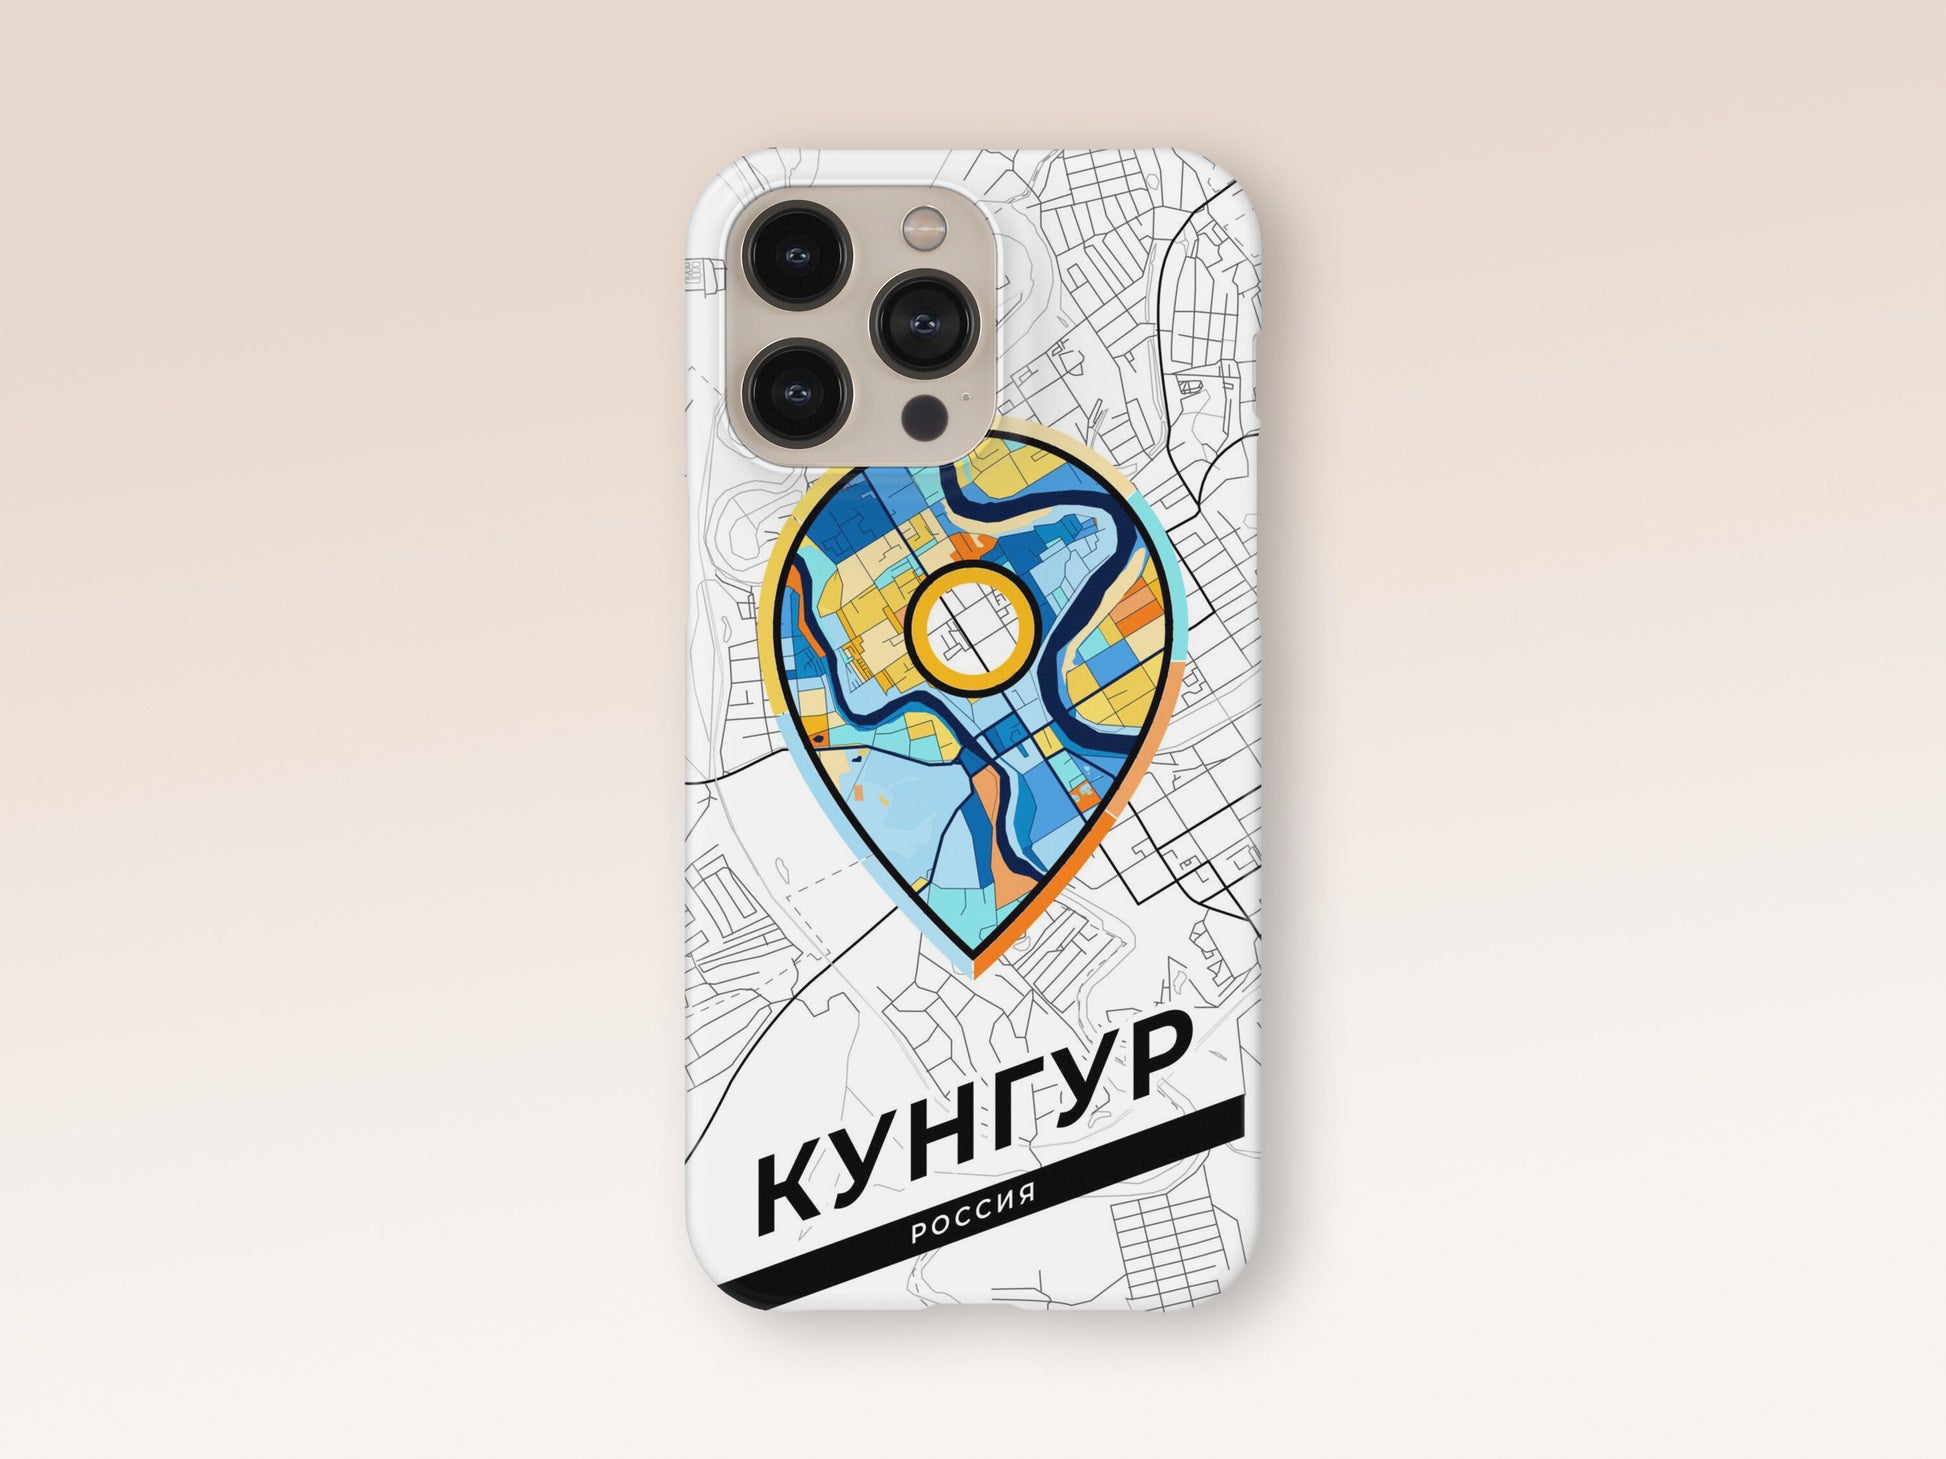 Kungur Russia slim phone case with colorful icon. Birthday, wedding or housewarming gift. Couple match cases. 1